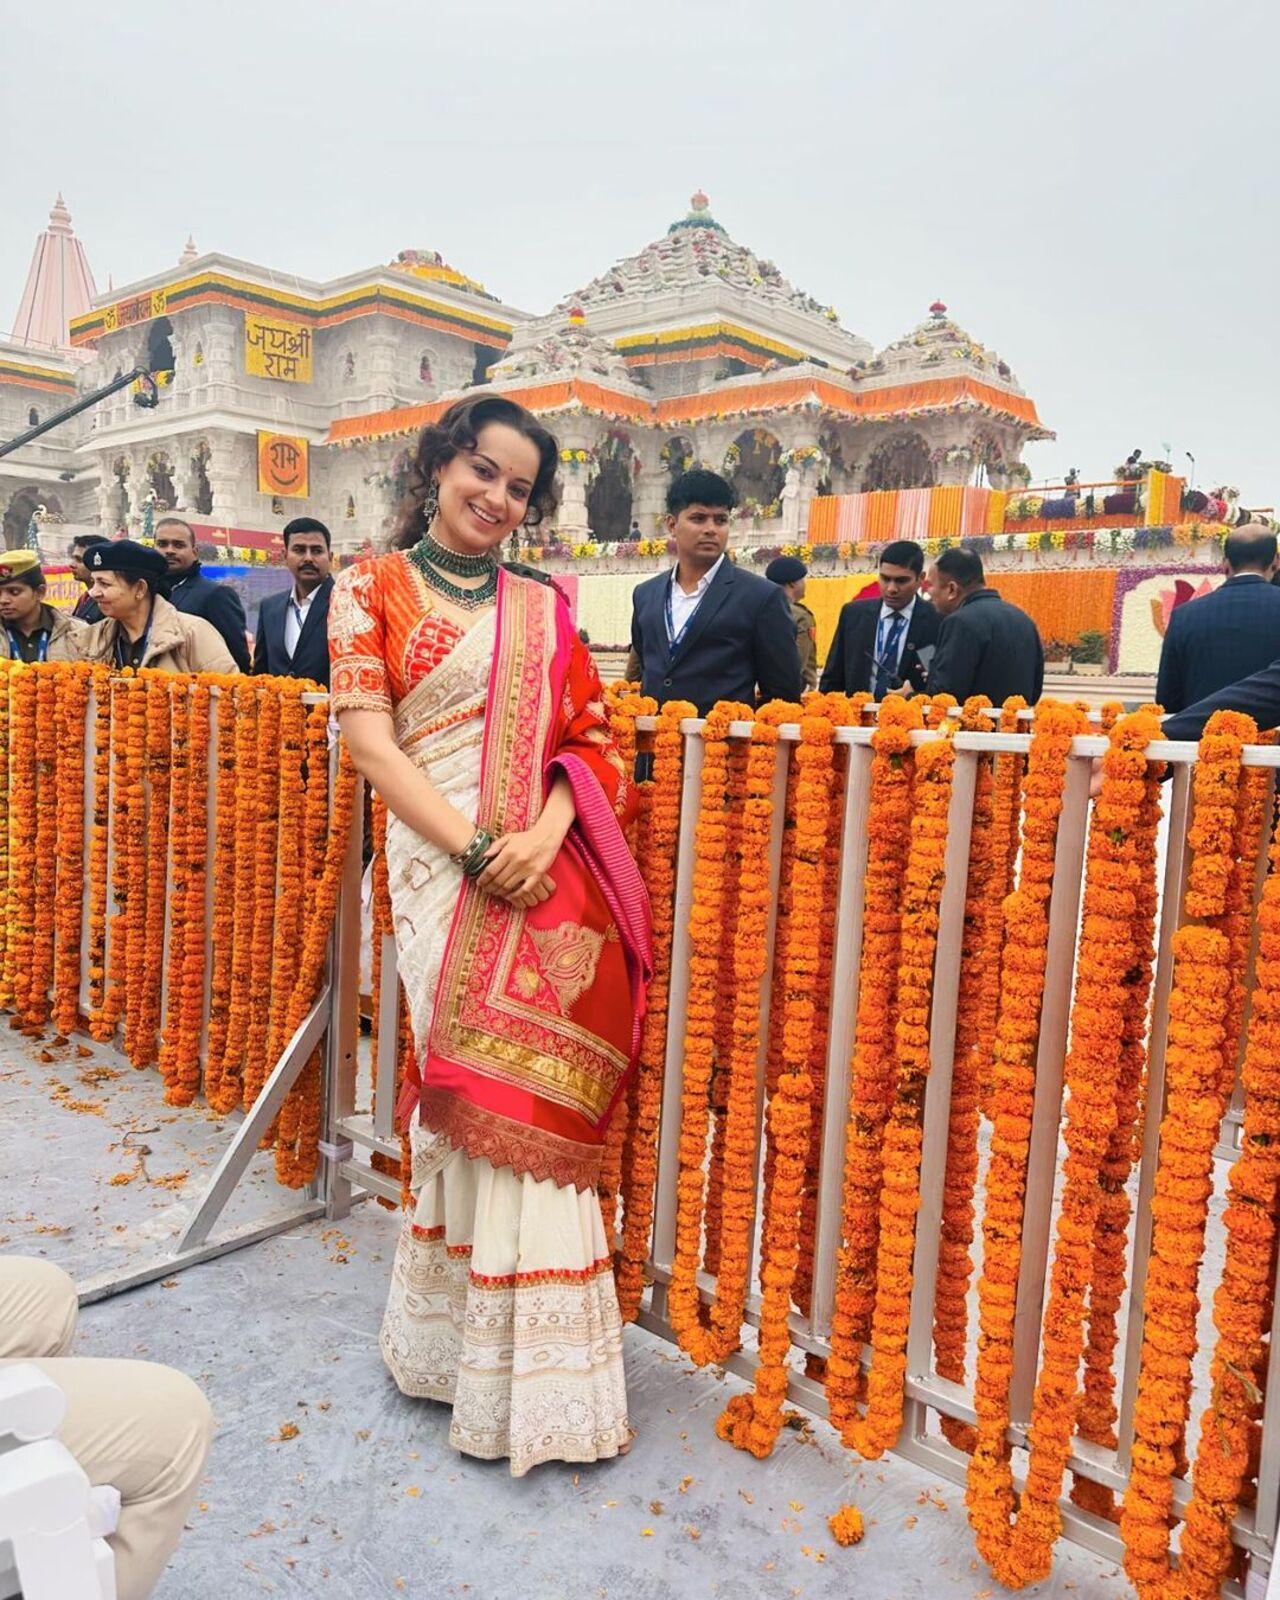 Kangana Ranaut was among the first guests to arrive for the Ram Mandir inauguration today. She arrived in Ayodhya on Saturday evening and had a spiritual experience on Sunday as she performed yagya, met gurus and cleaned temple floor